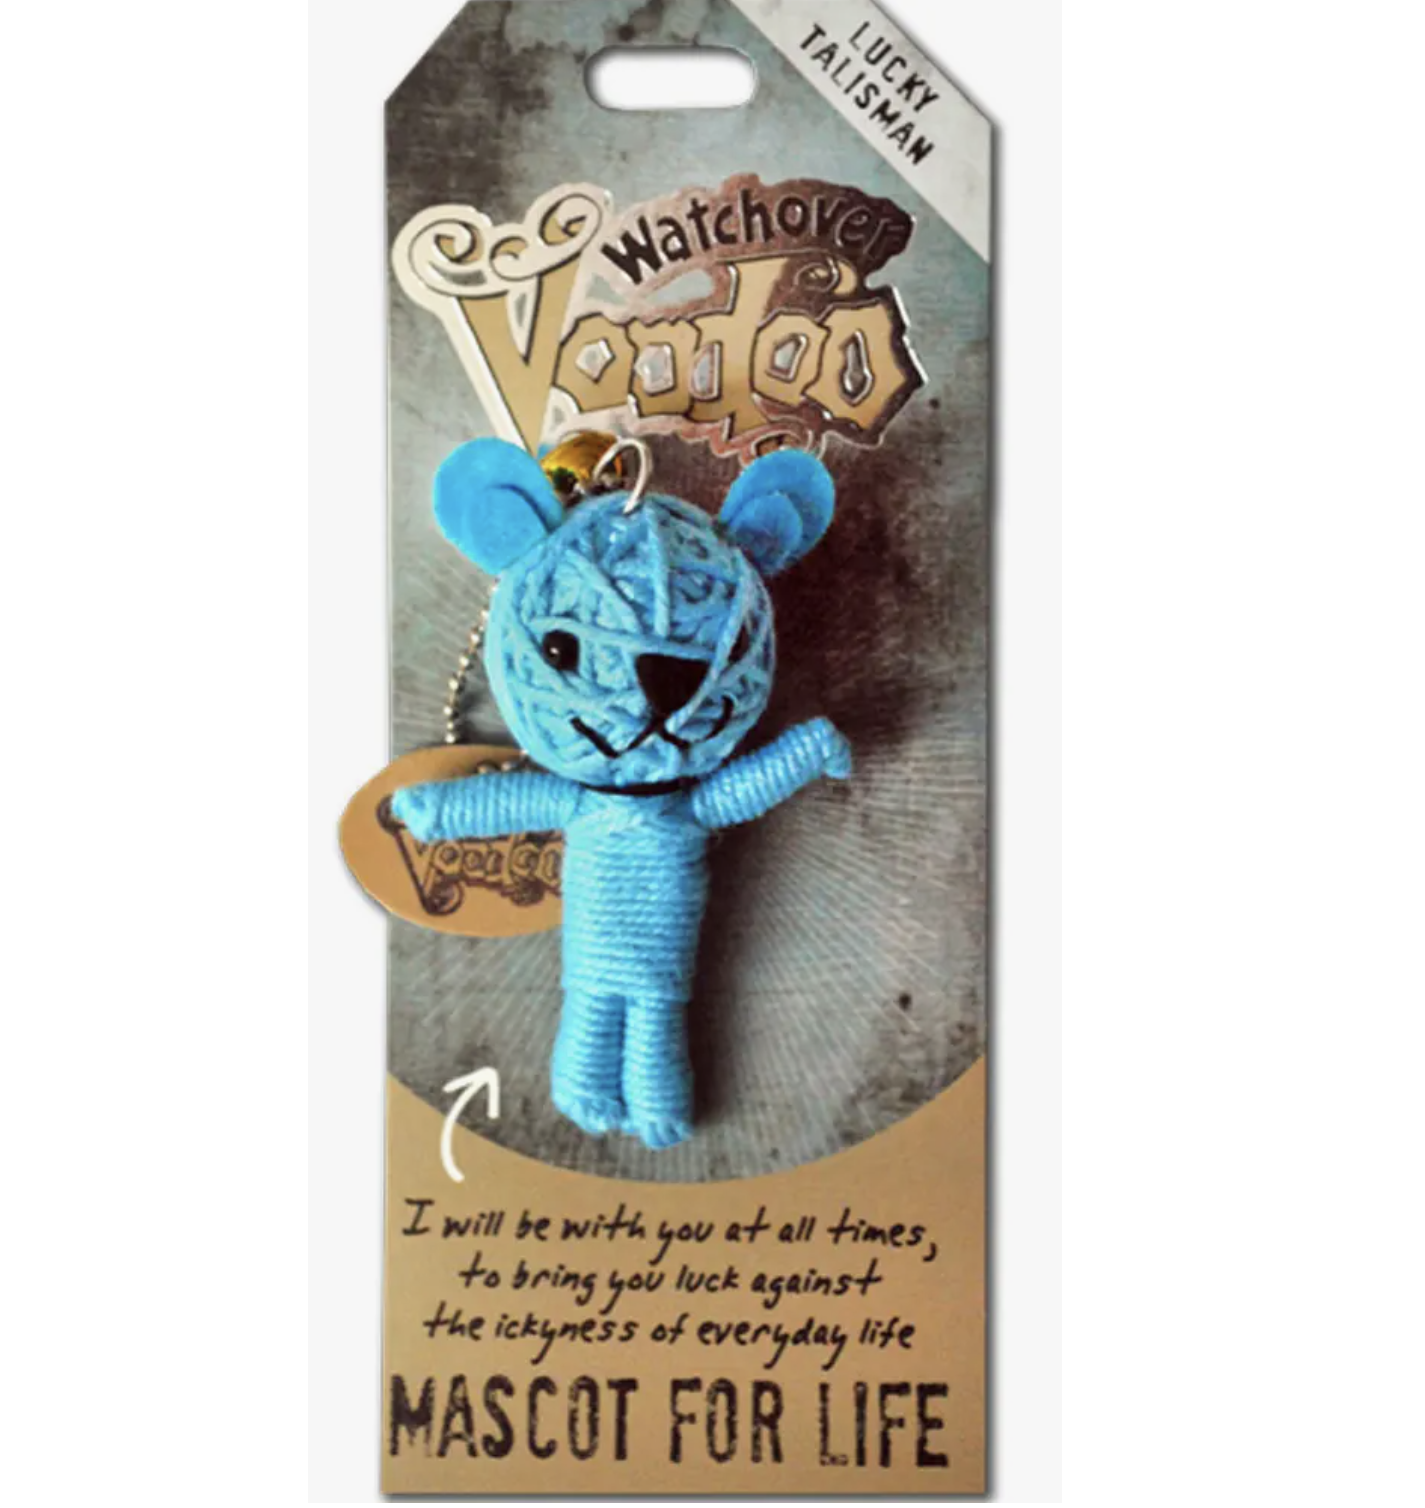 Mascot for Life Voodoo Doll